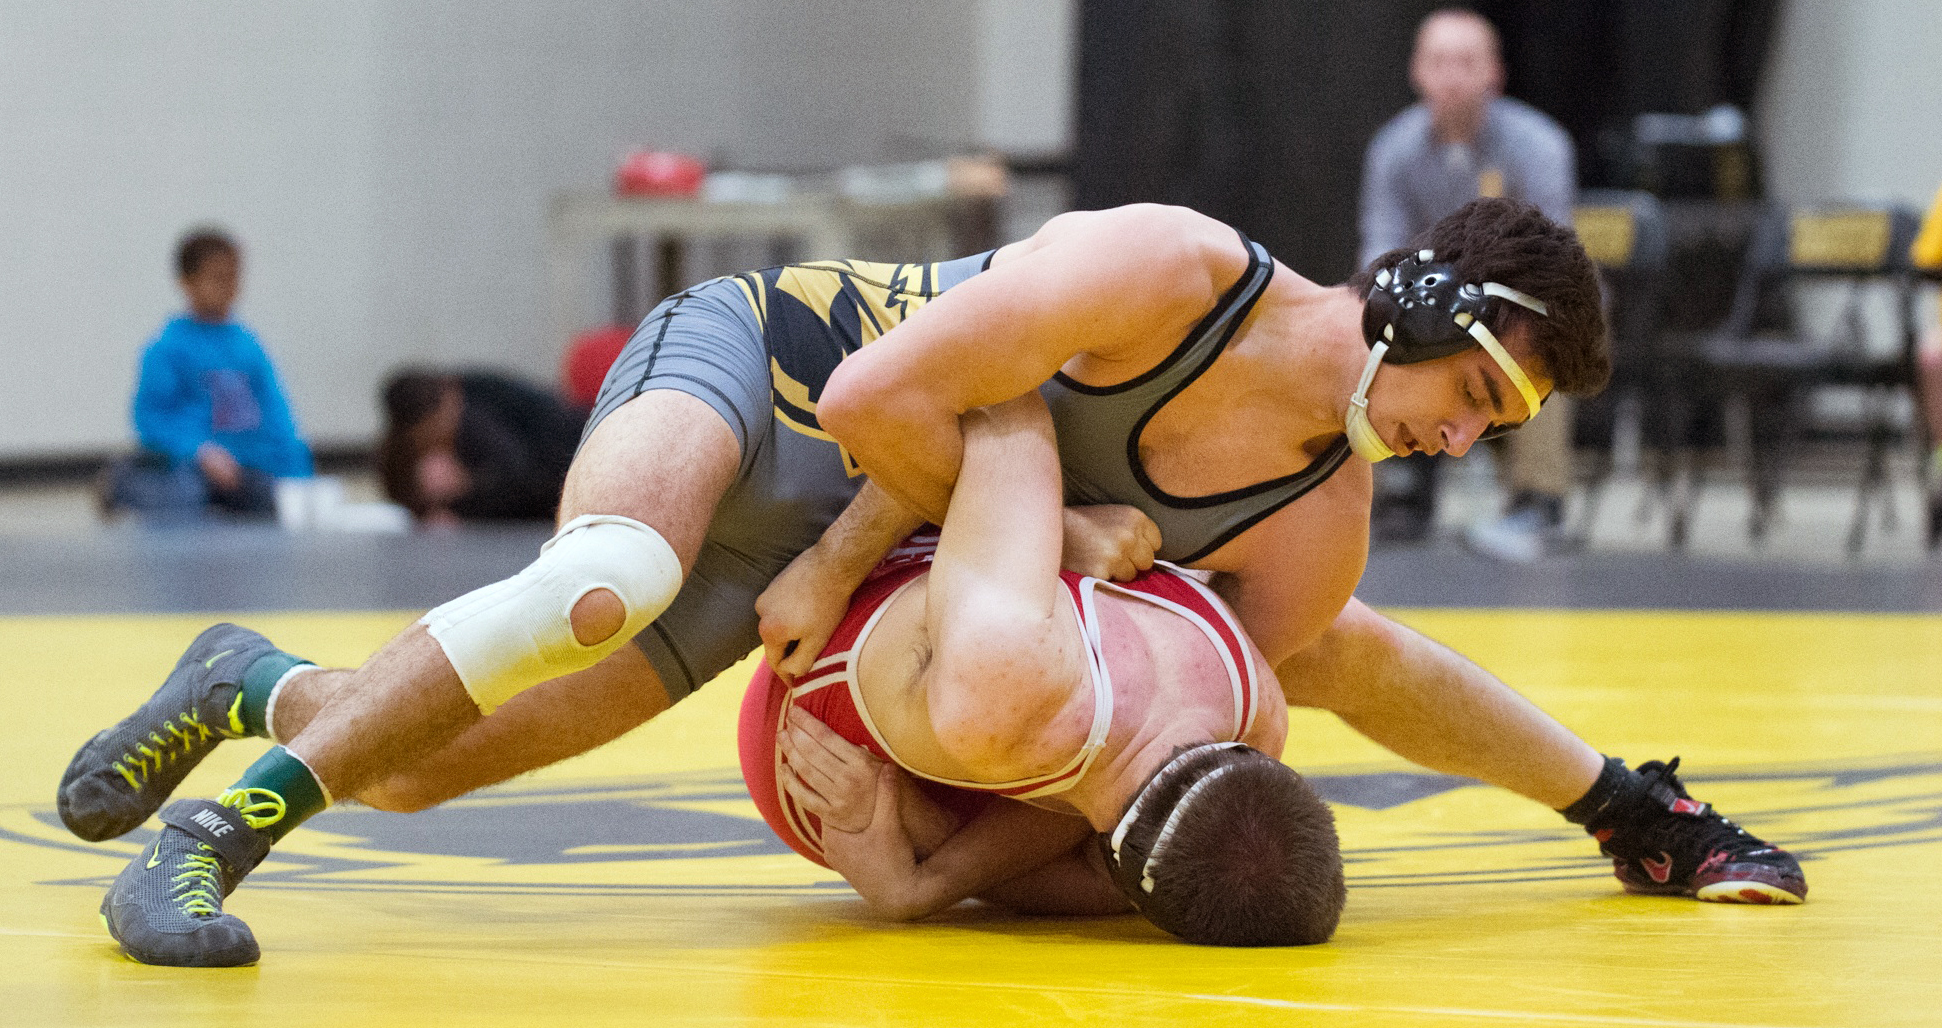 John DePersia recorded a pin in 37 seconds over Michael Orth from the UW Wrestling Club.